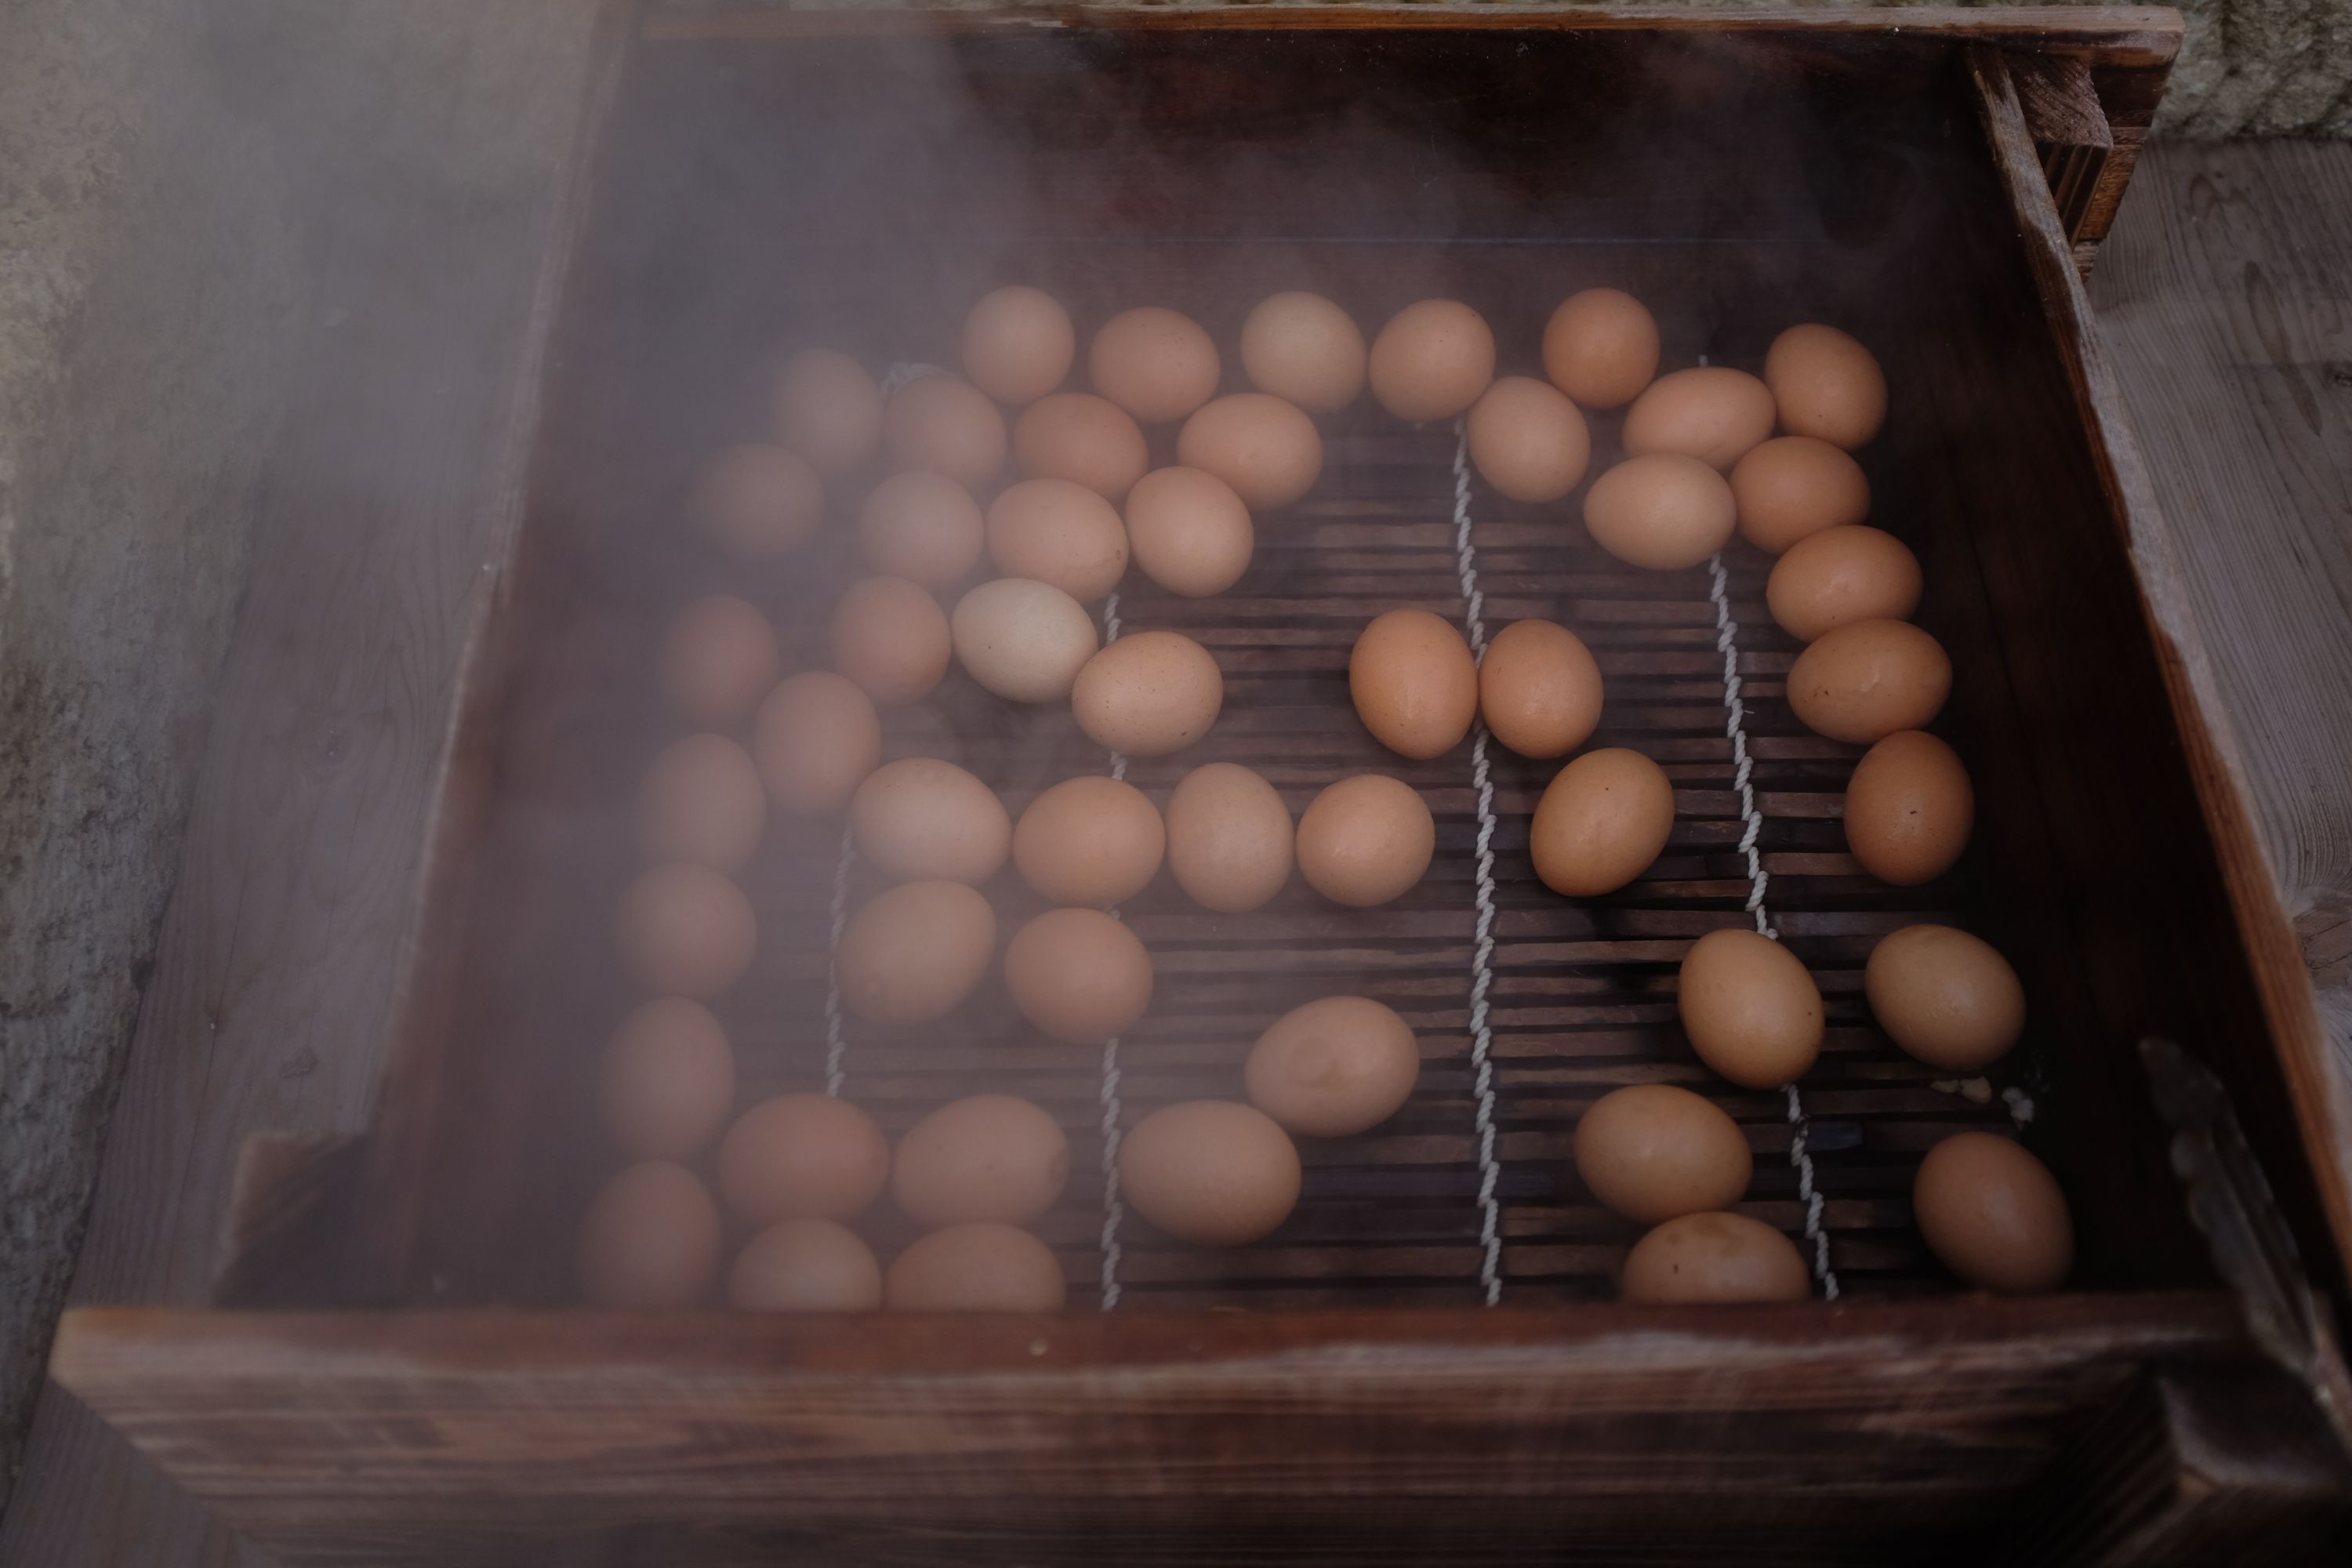 Eggs being steamed in a similar crate.